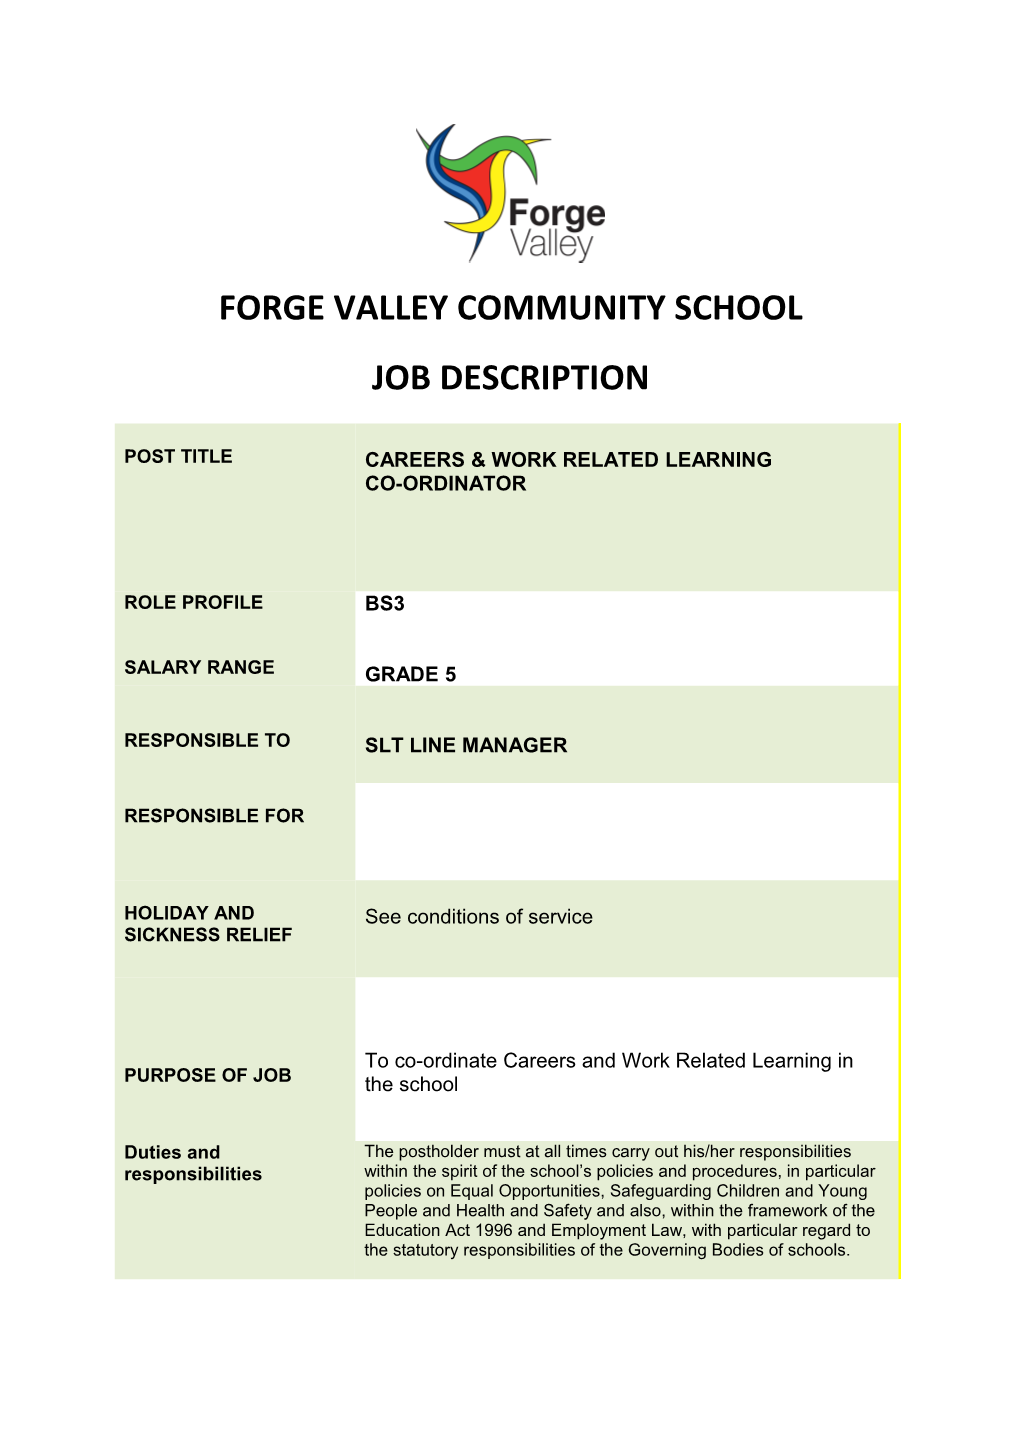 Forge Valley Community School